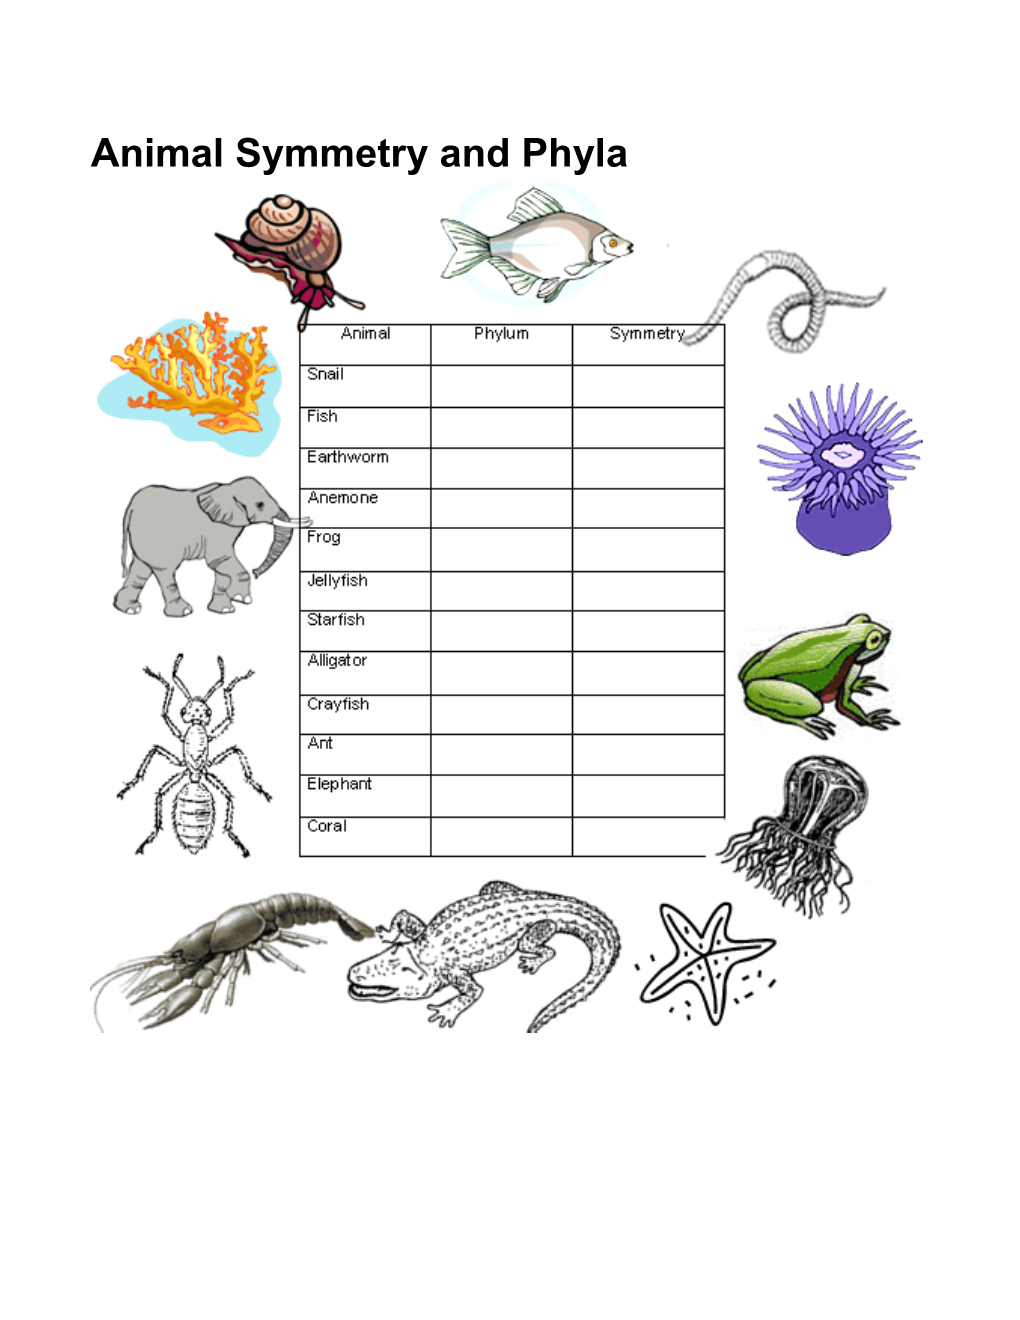 Animal Symmetry and Phyla